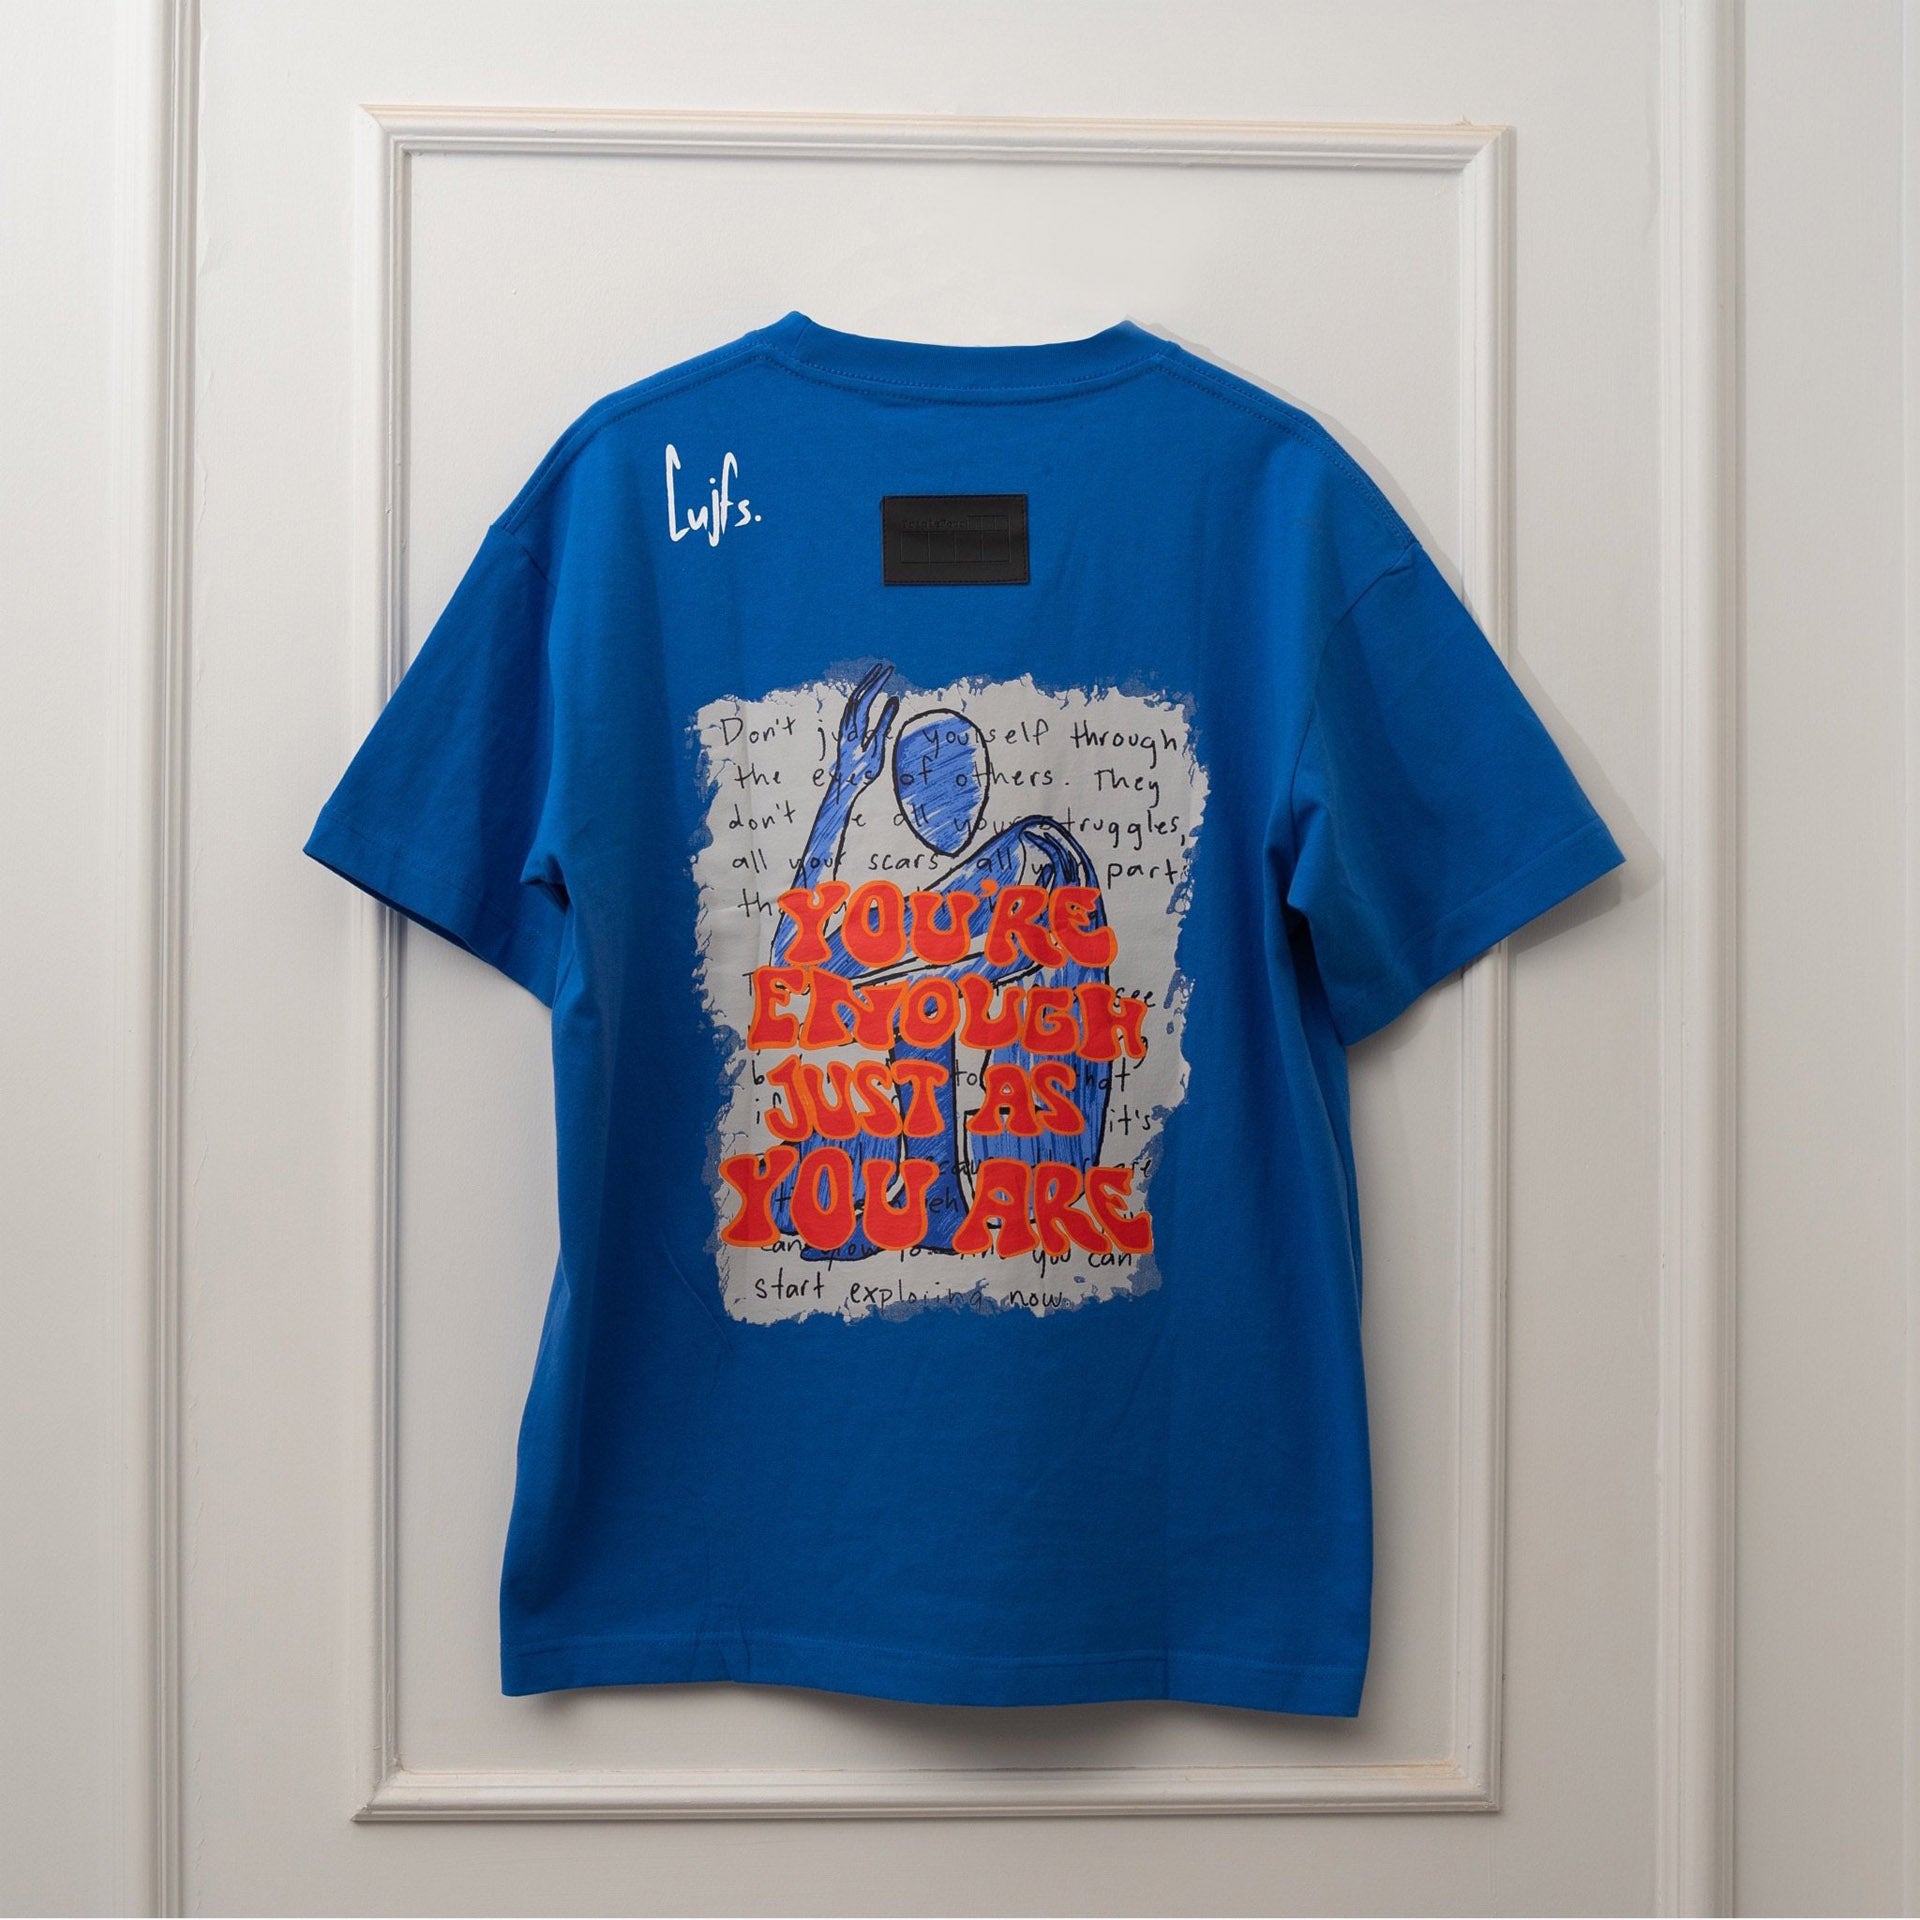 Blue "IV3" T-shirt From Triple Four